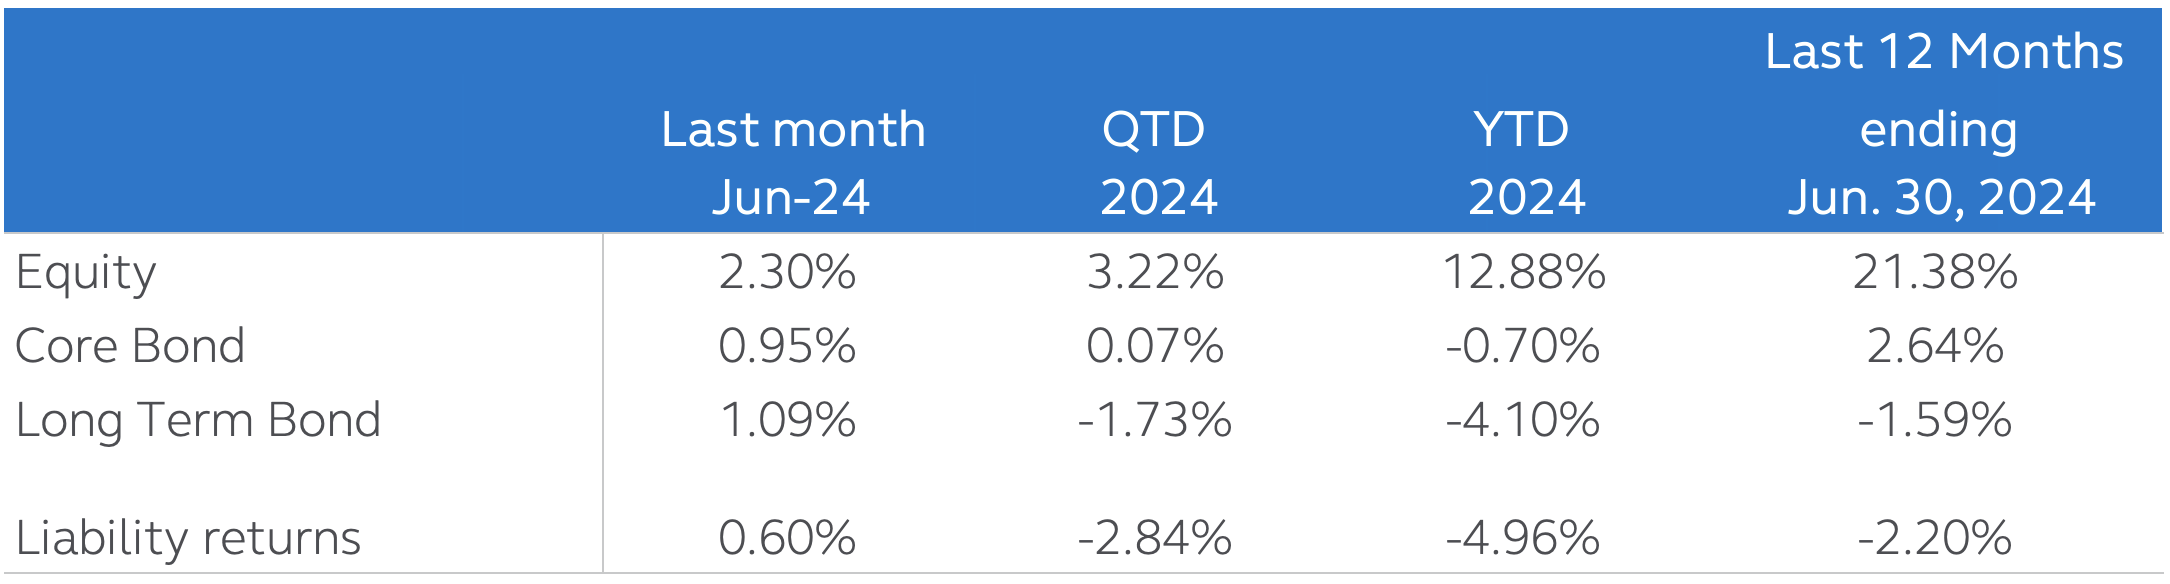 DB plan asset and liability market returns for June 2024 and last 12 months